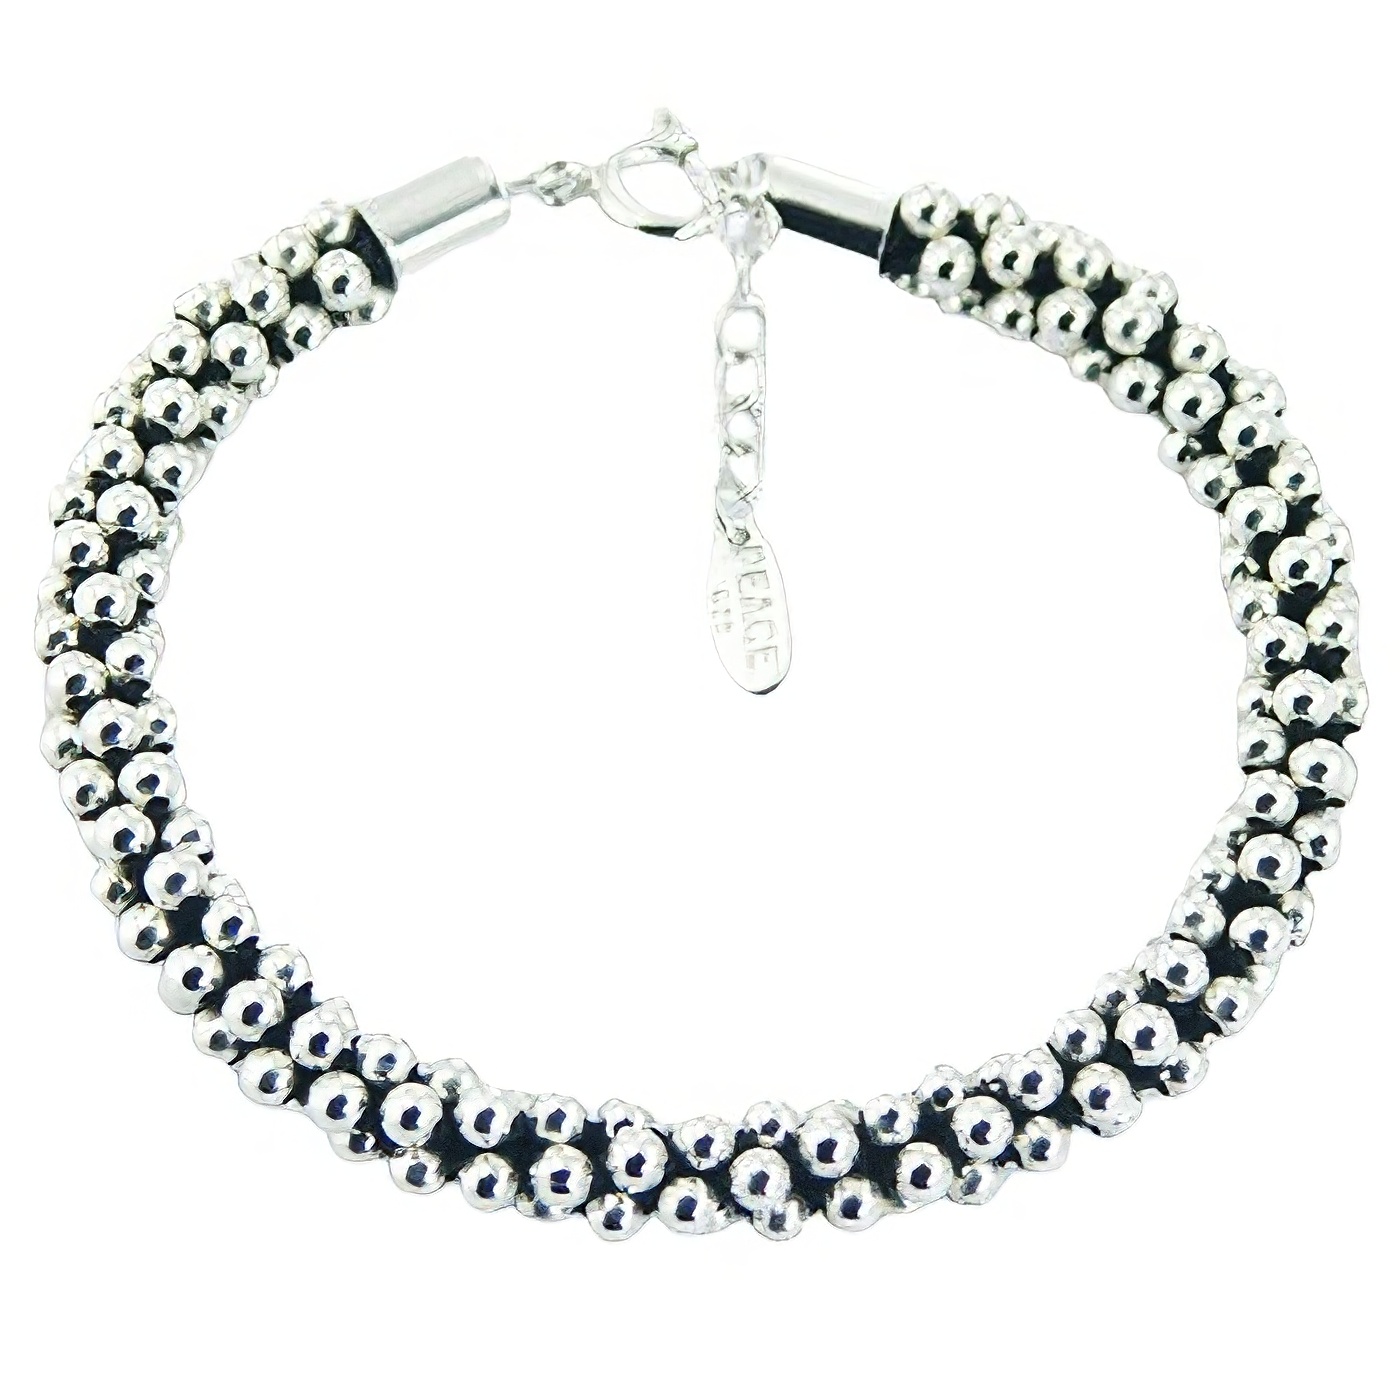 Handcrafted Macrame Bracelet Covered with Silver Beads 